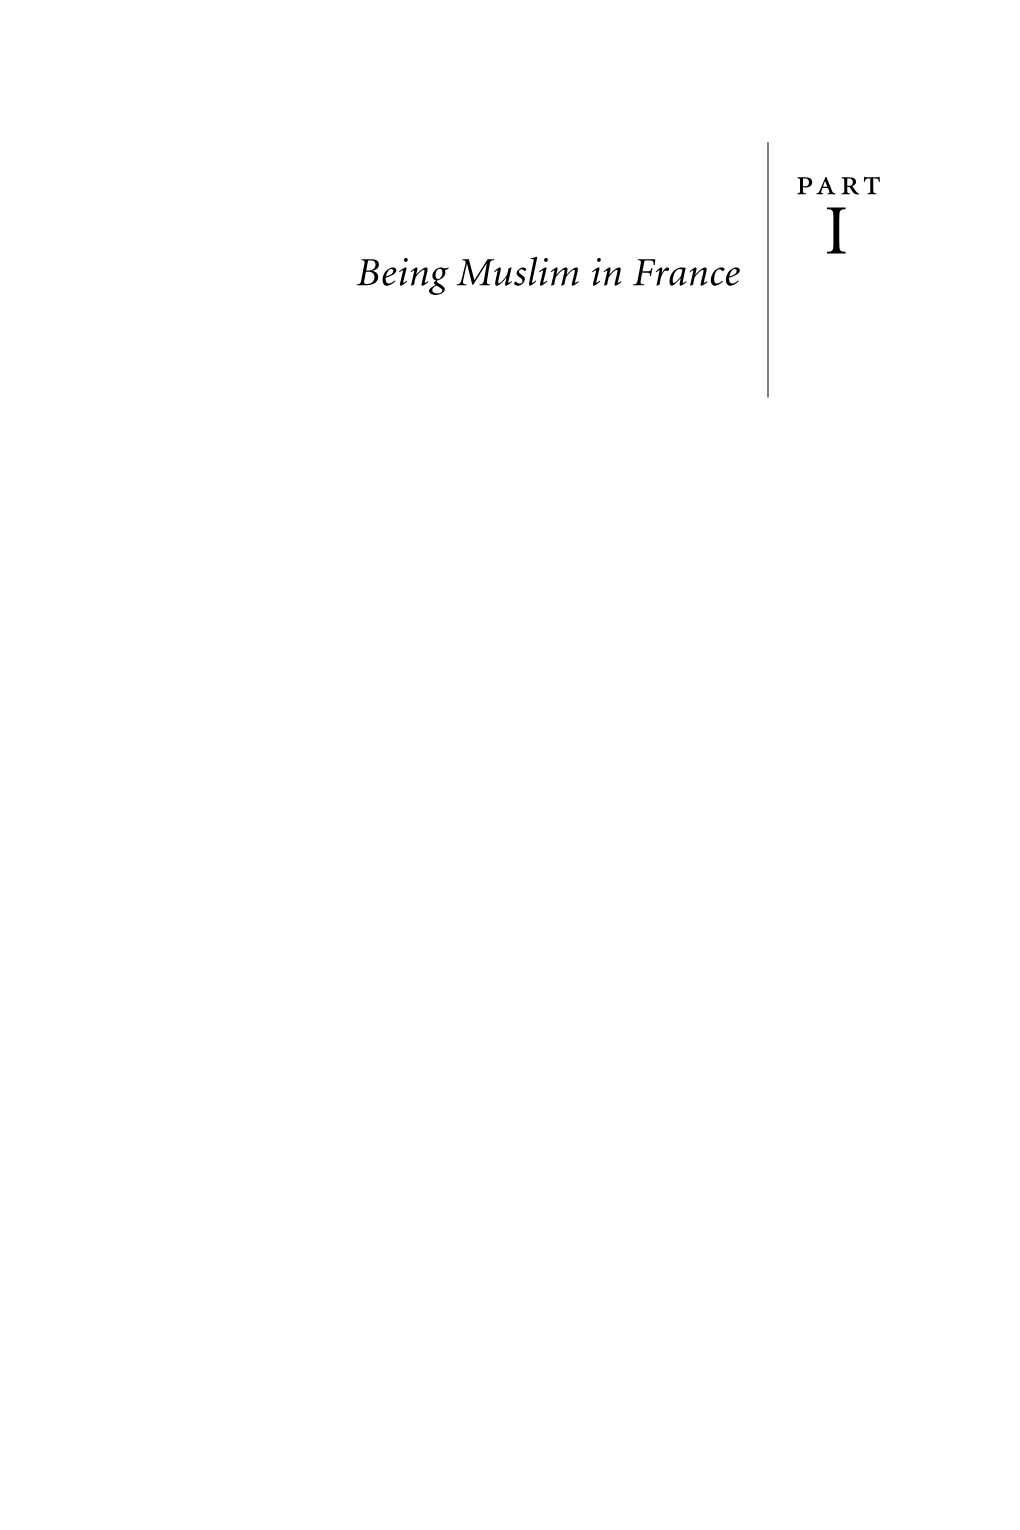 Being Muslim in France 01-5151-6 Ch1.Qxd 6/30/06 11:17 AM Page 14 01-5151-6 Ch1.Qxd 6/30/06 11:17 AM Page 15